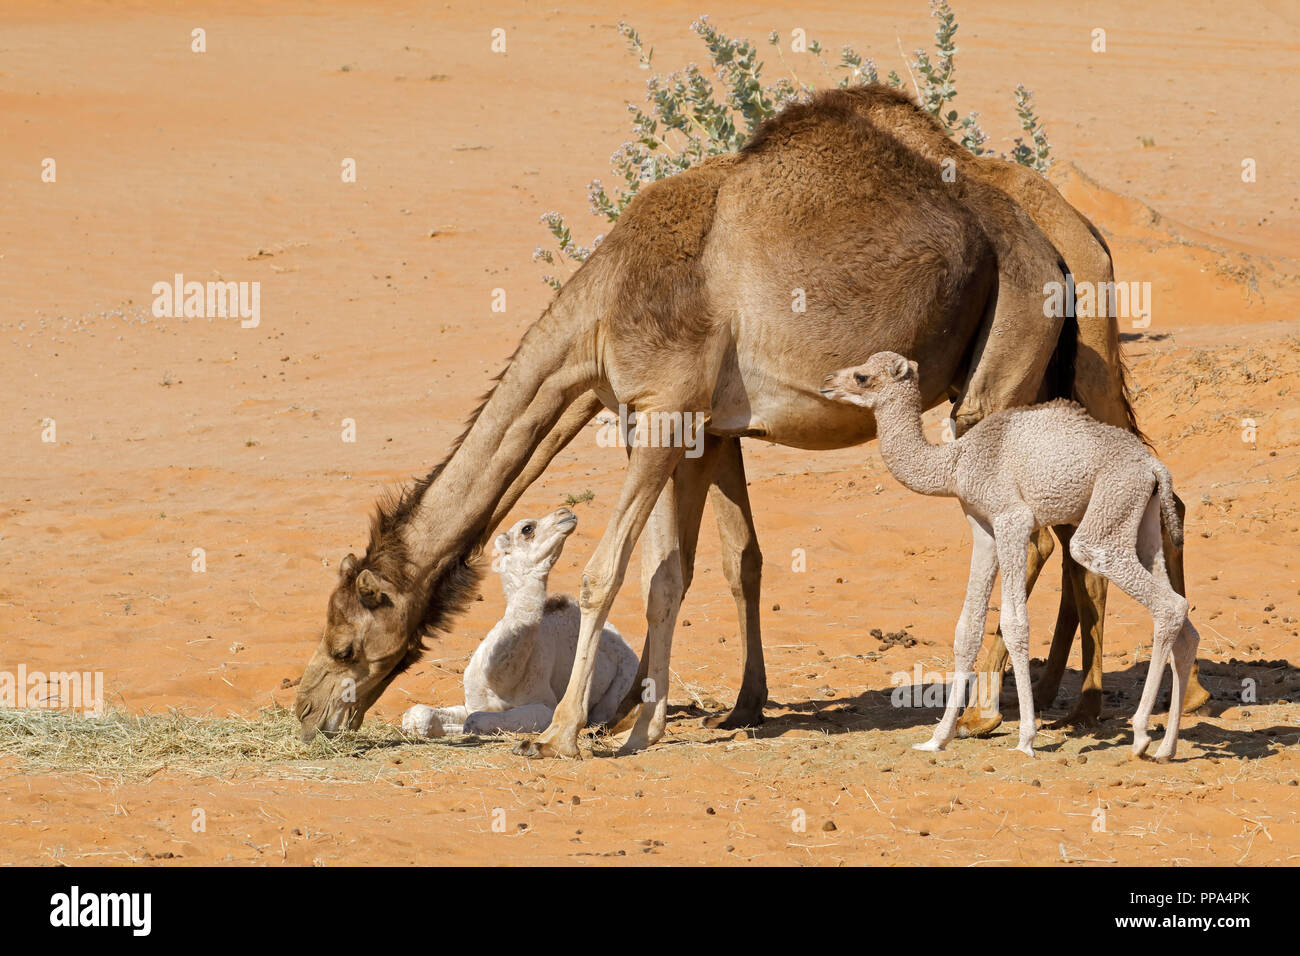 Camels with young calves on a desert sand dune, Arabian Peninsula Stock Photo